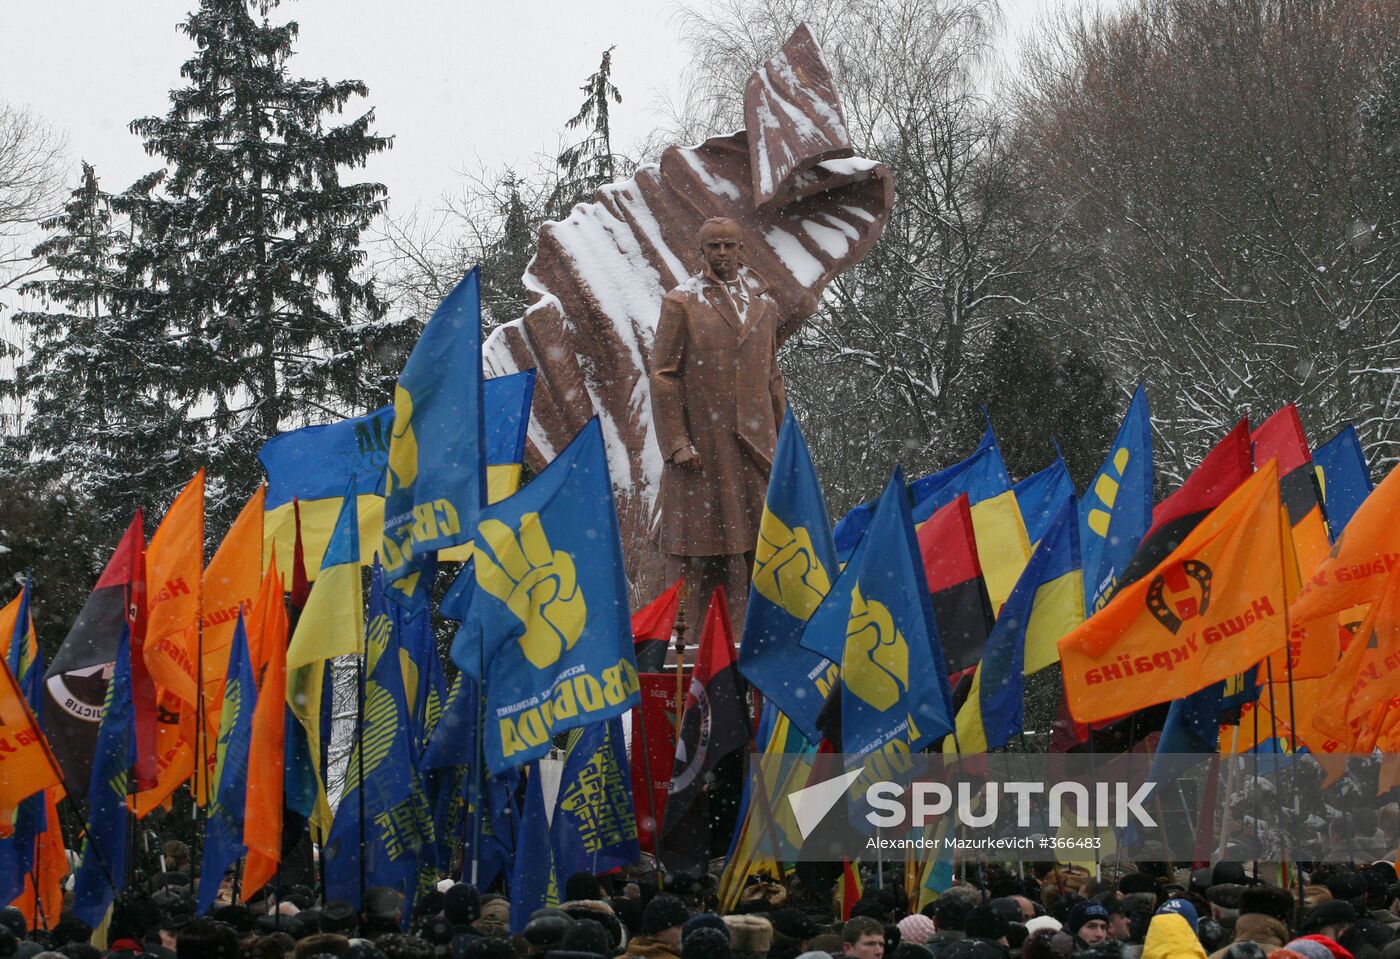 Monument to Stepan Bandera unveiled in Ternopil, Ukraine